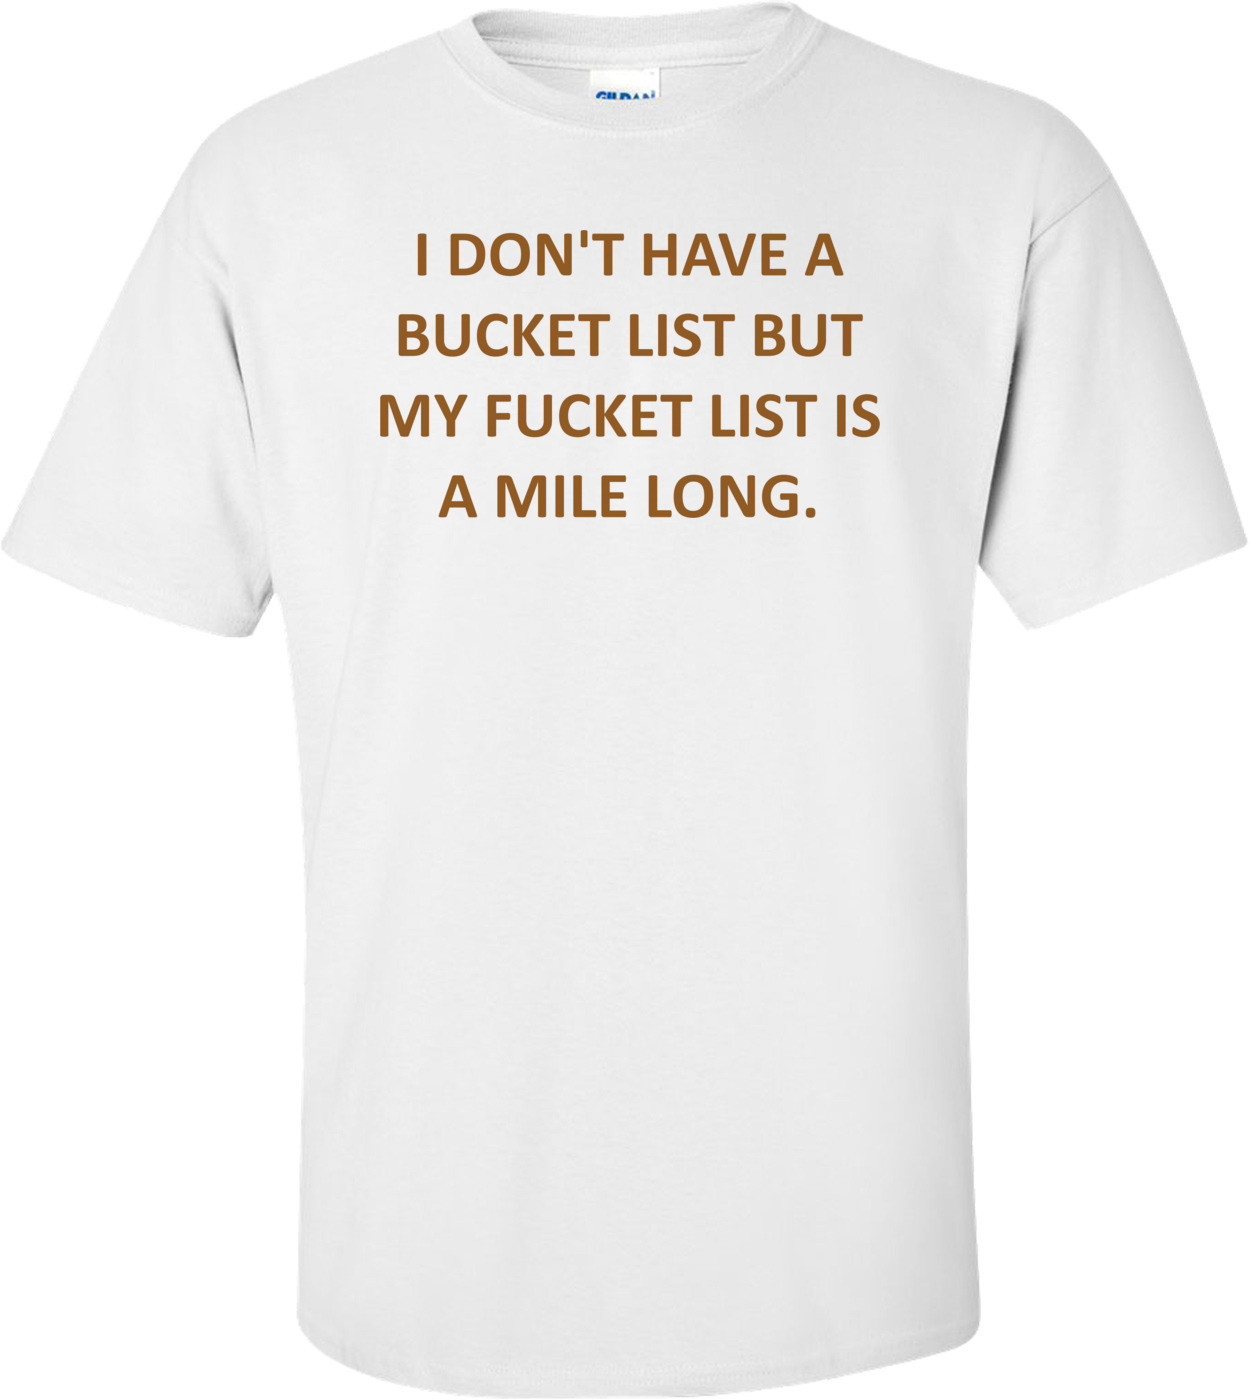 I DON'T HAVE A BUCKET LIST BUT MY FUCKET LIST IS A MILE LONG.